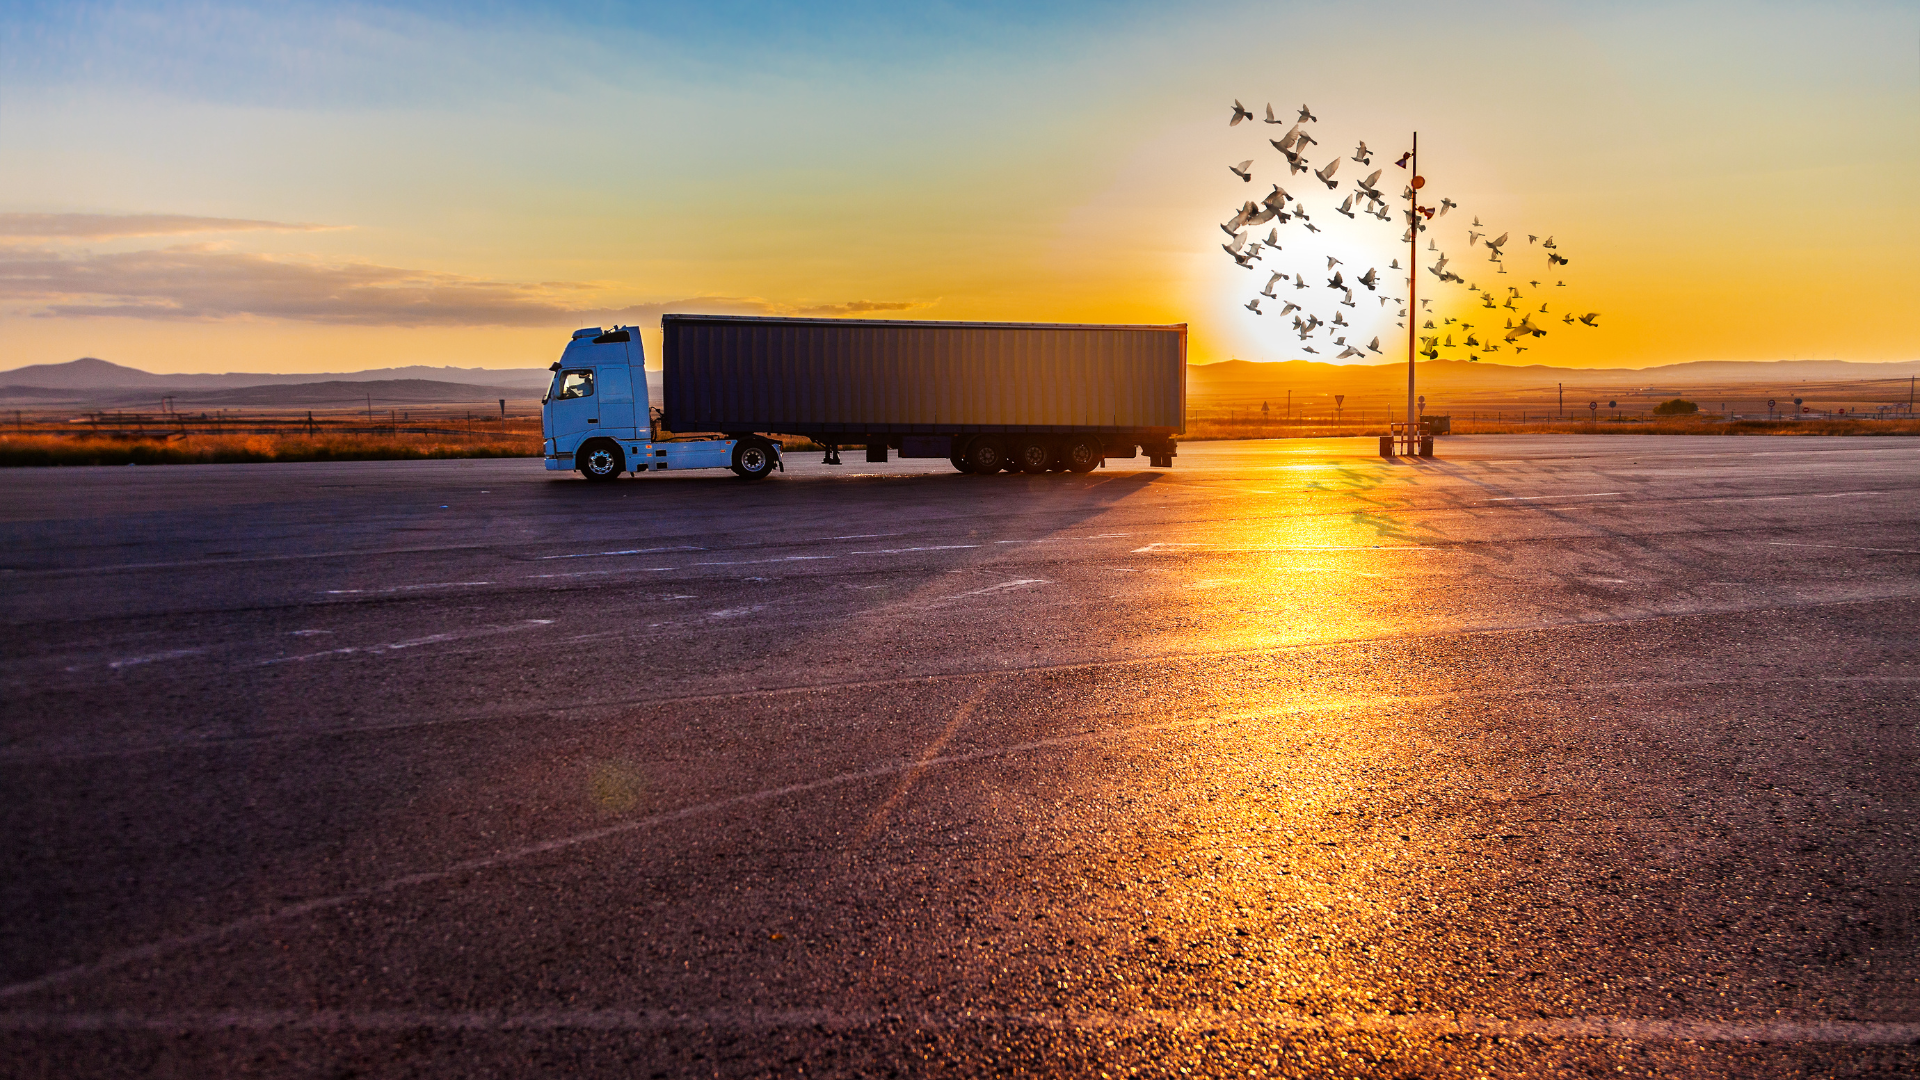 A lorry on a road against a sunset